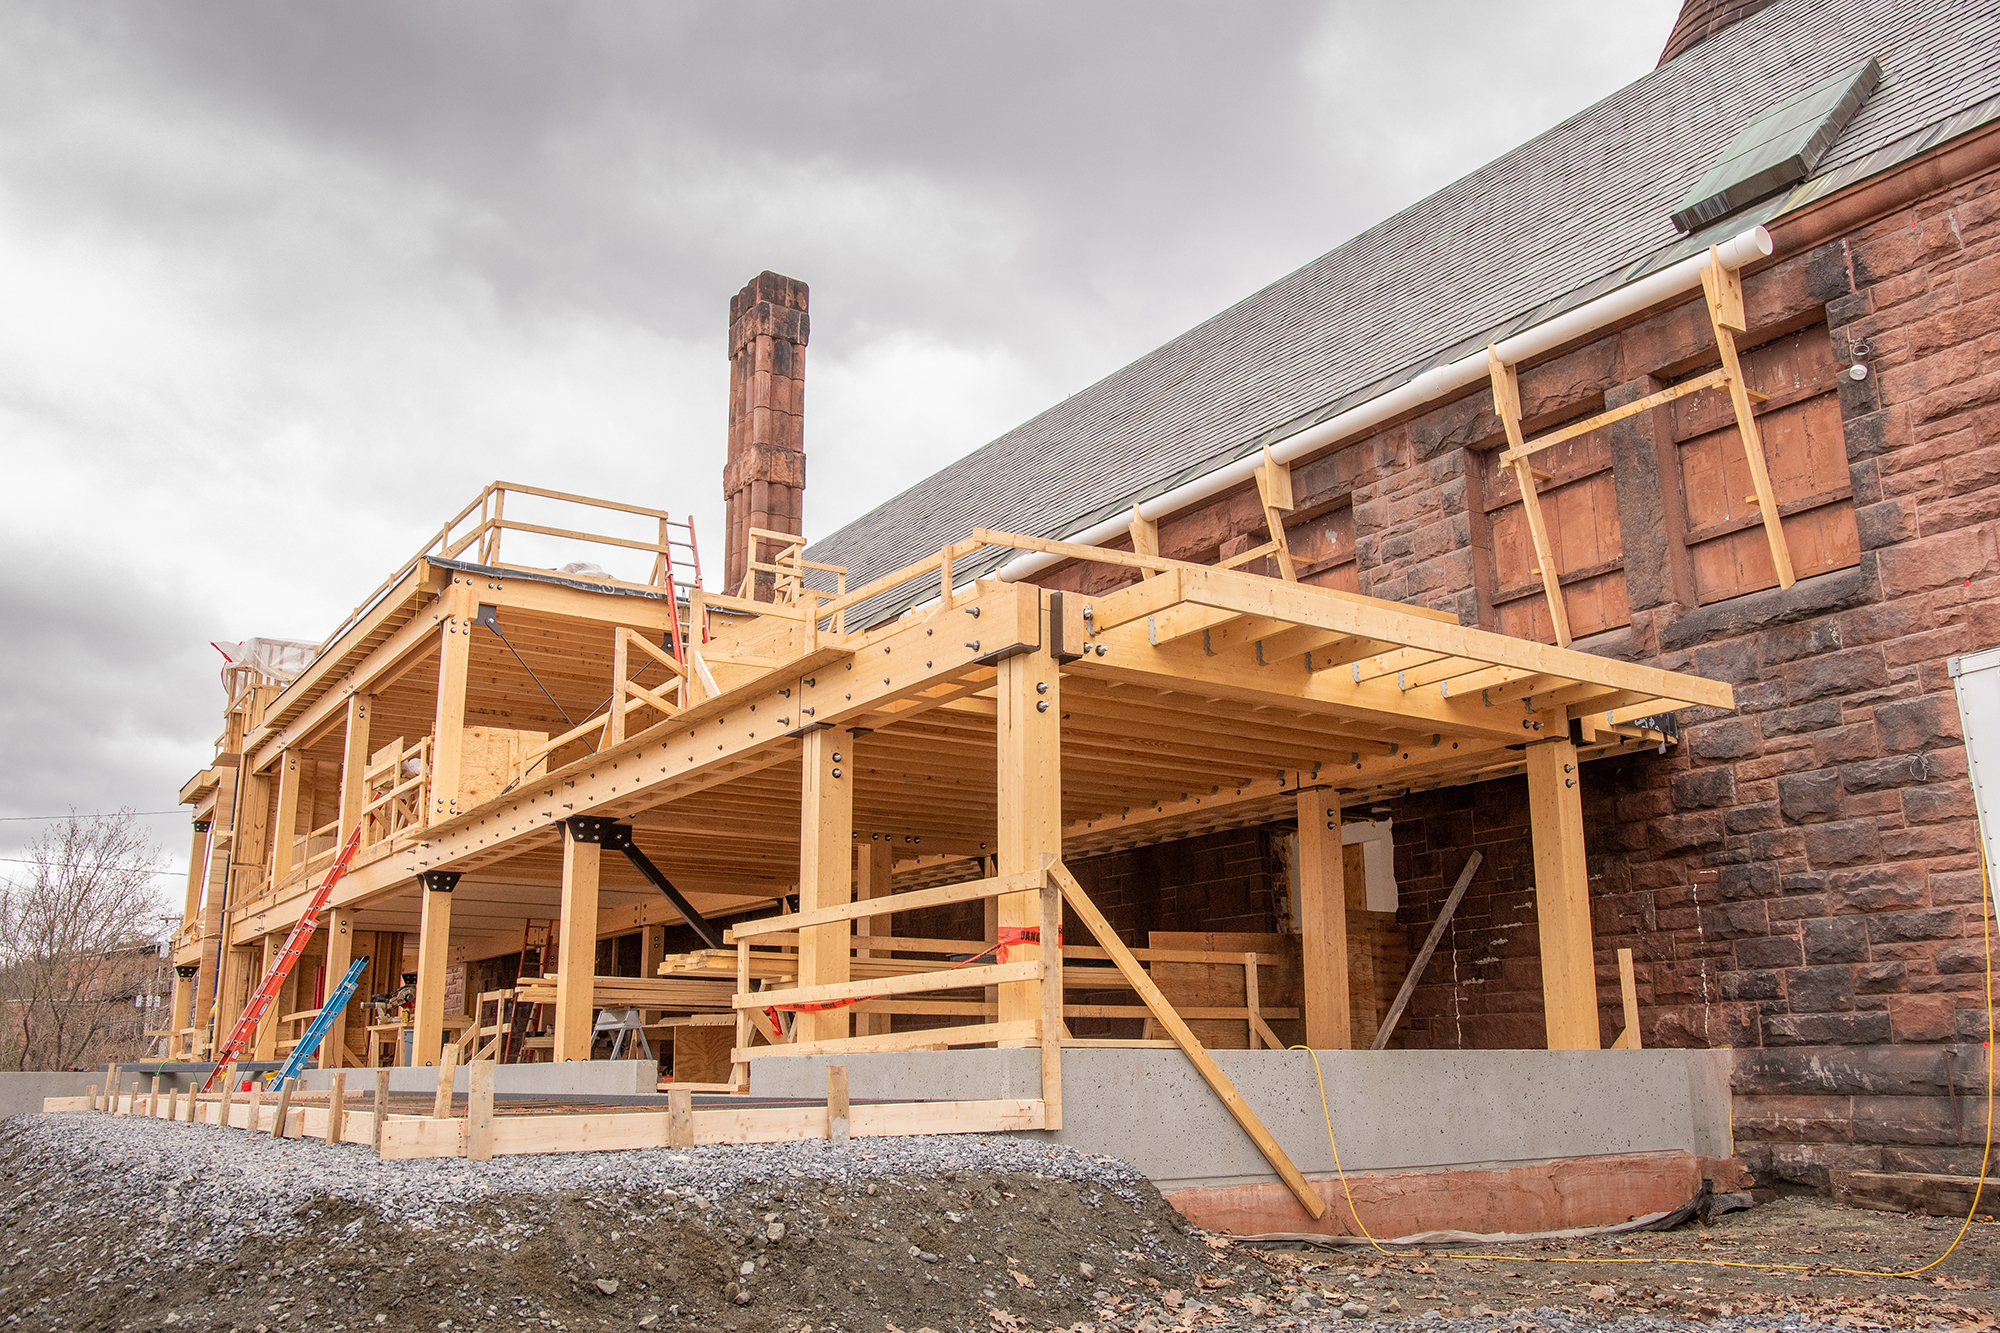 Cross-laminated timber, which is being used at Fairbanks, consists of multiple wood panels that are glued together, providing strength and stability that is comparable to concrete, steel, and heavy timber. Photo by Erica Houskeeper.